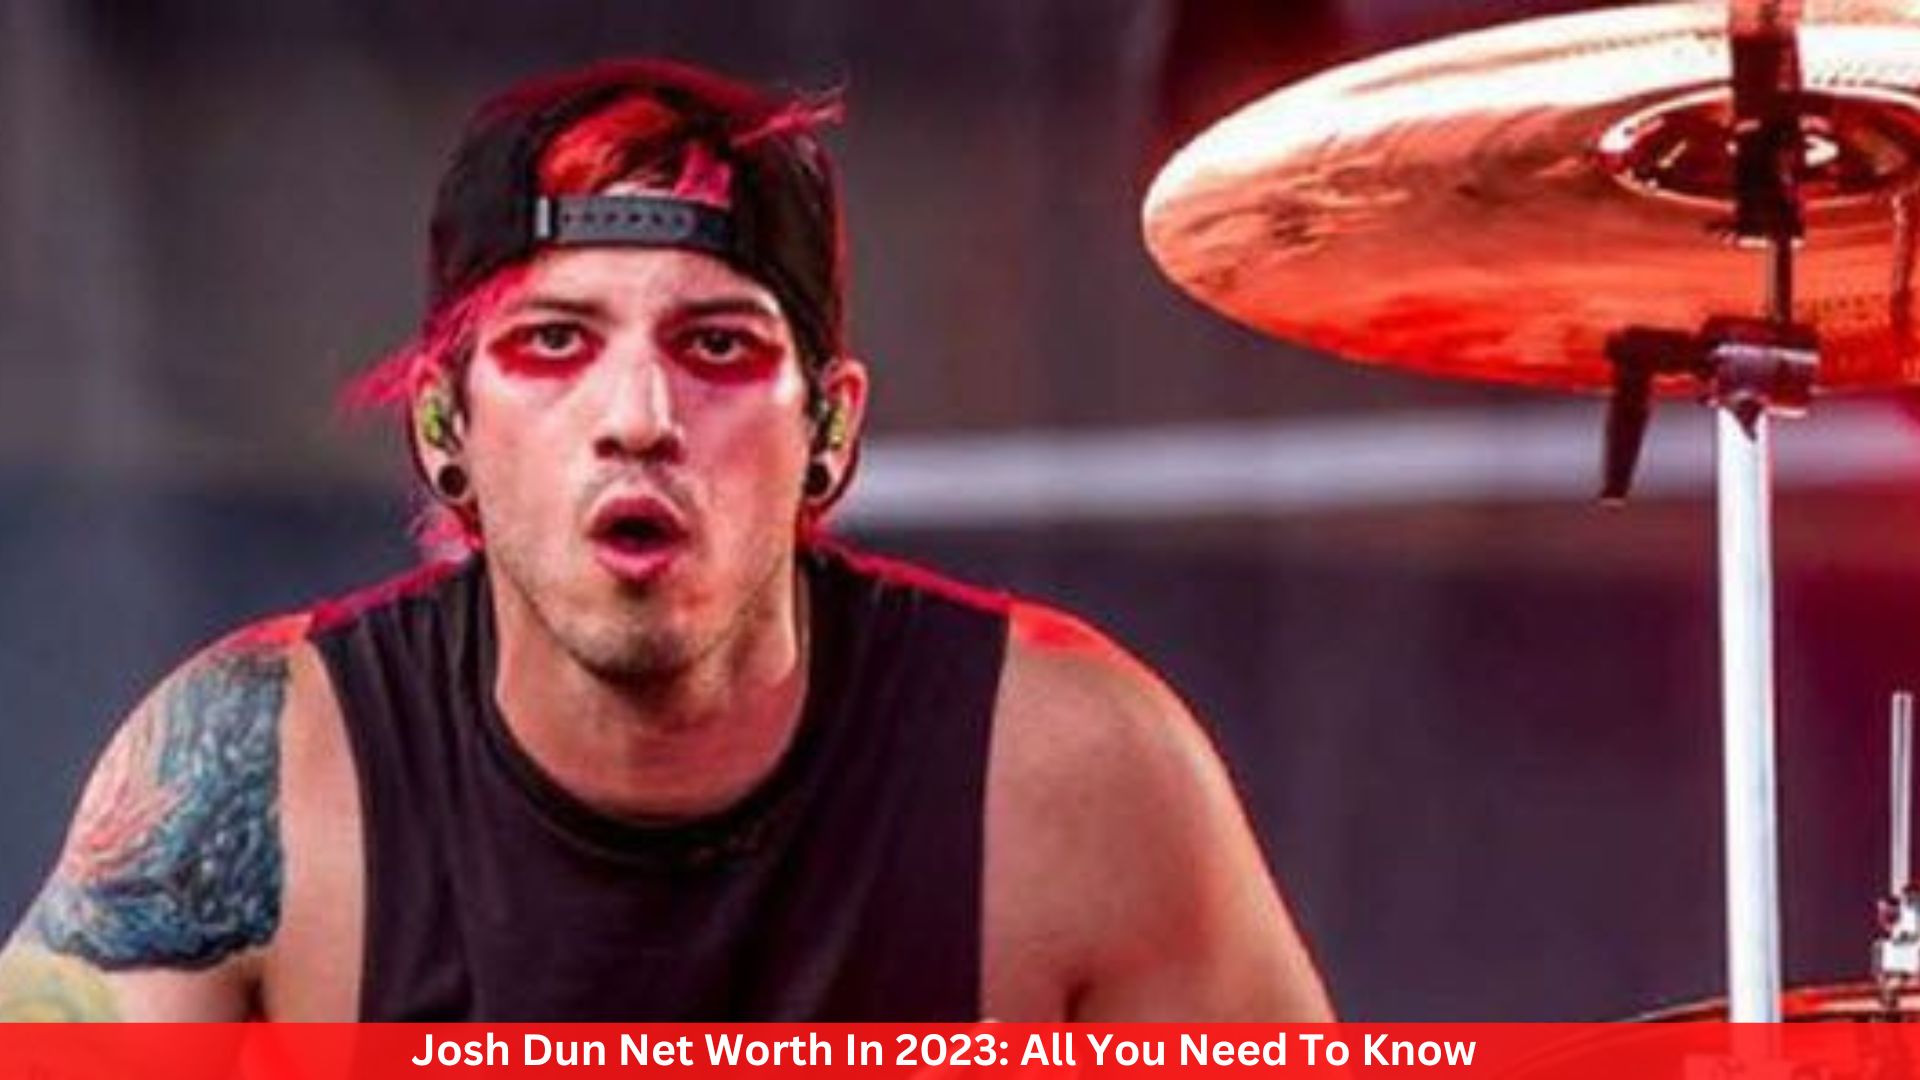 Josh Dun Net Worth In 2023: All You Need To Know